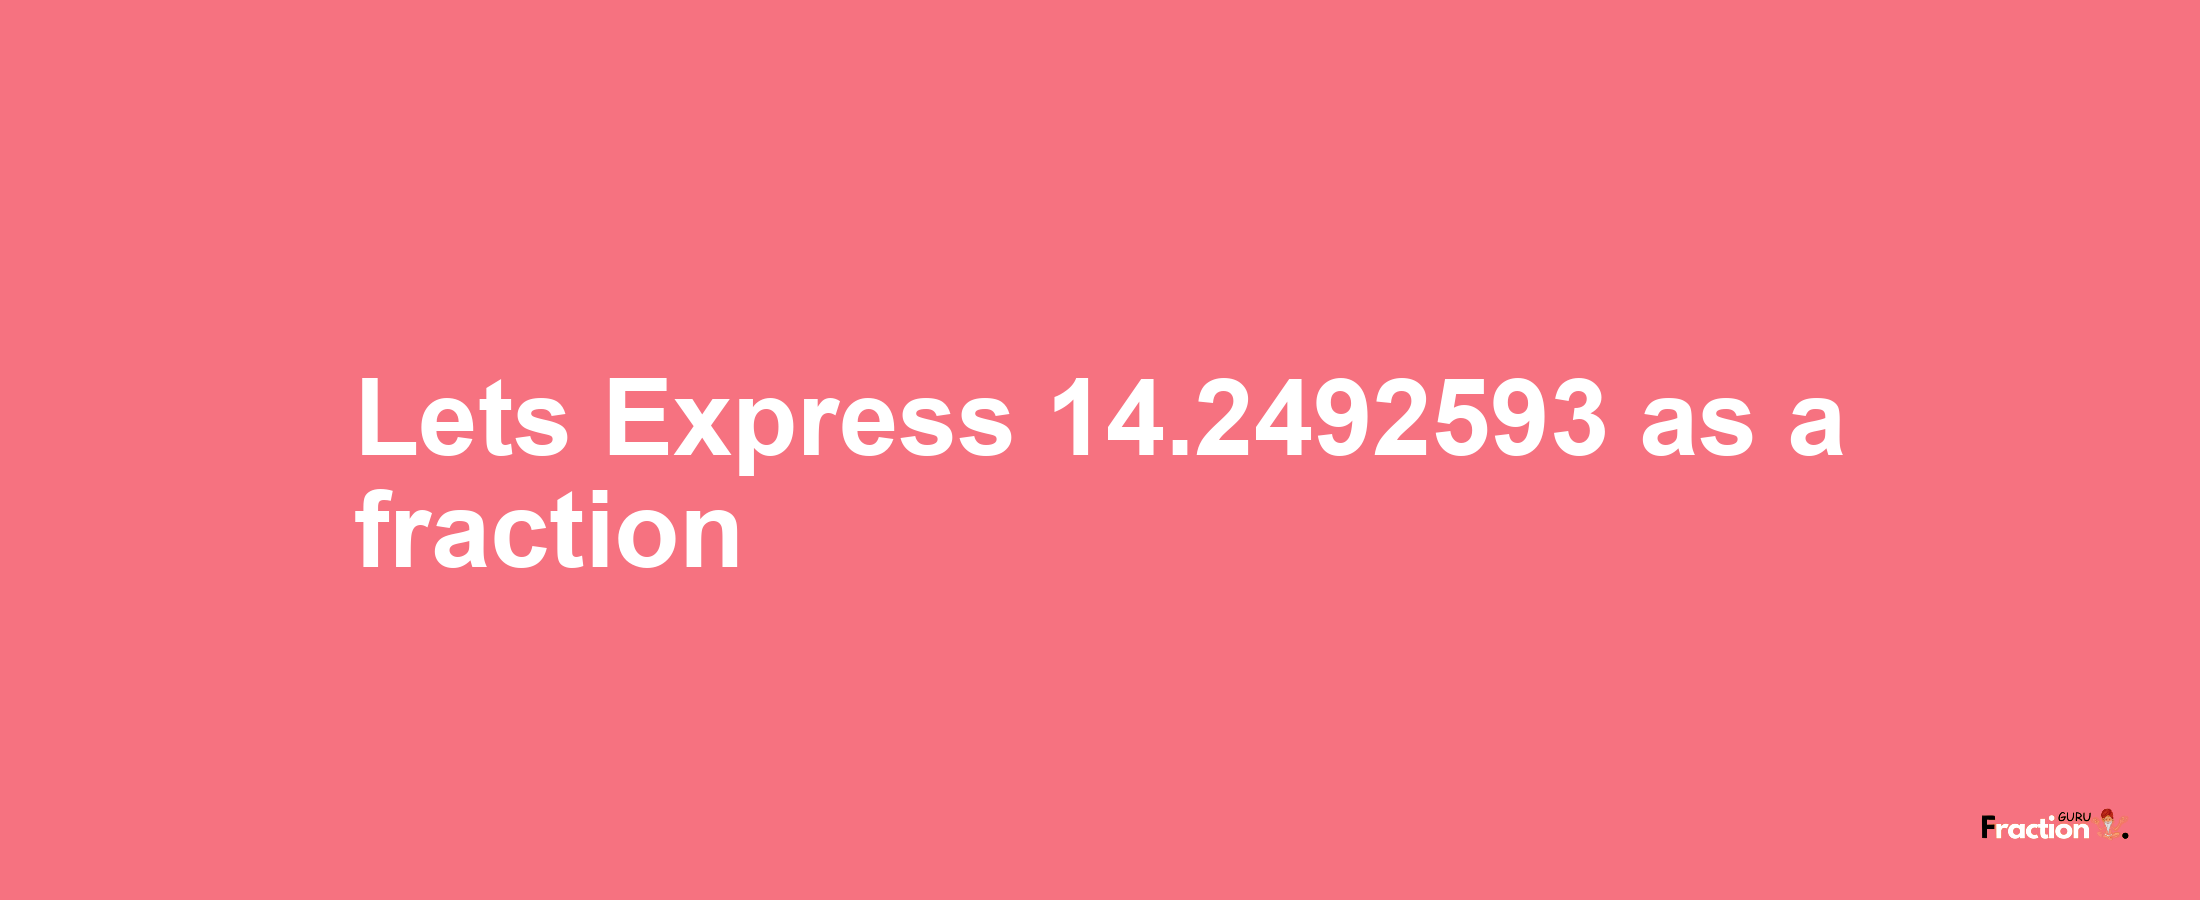 Lets Express 14.2492593 as afraction